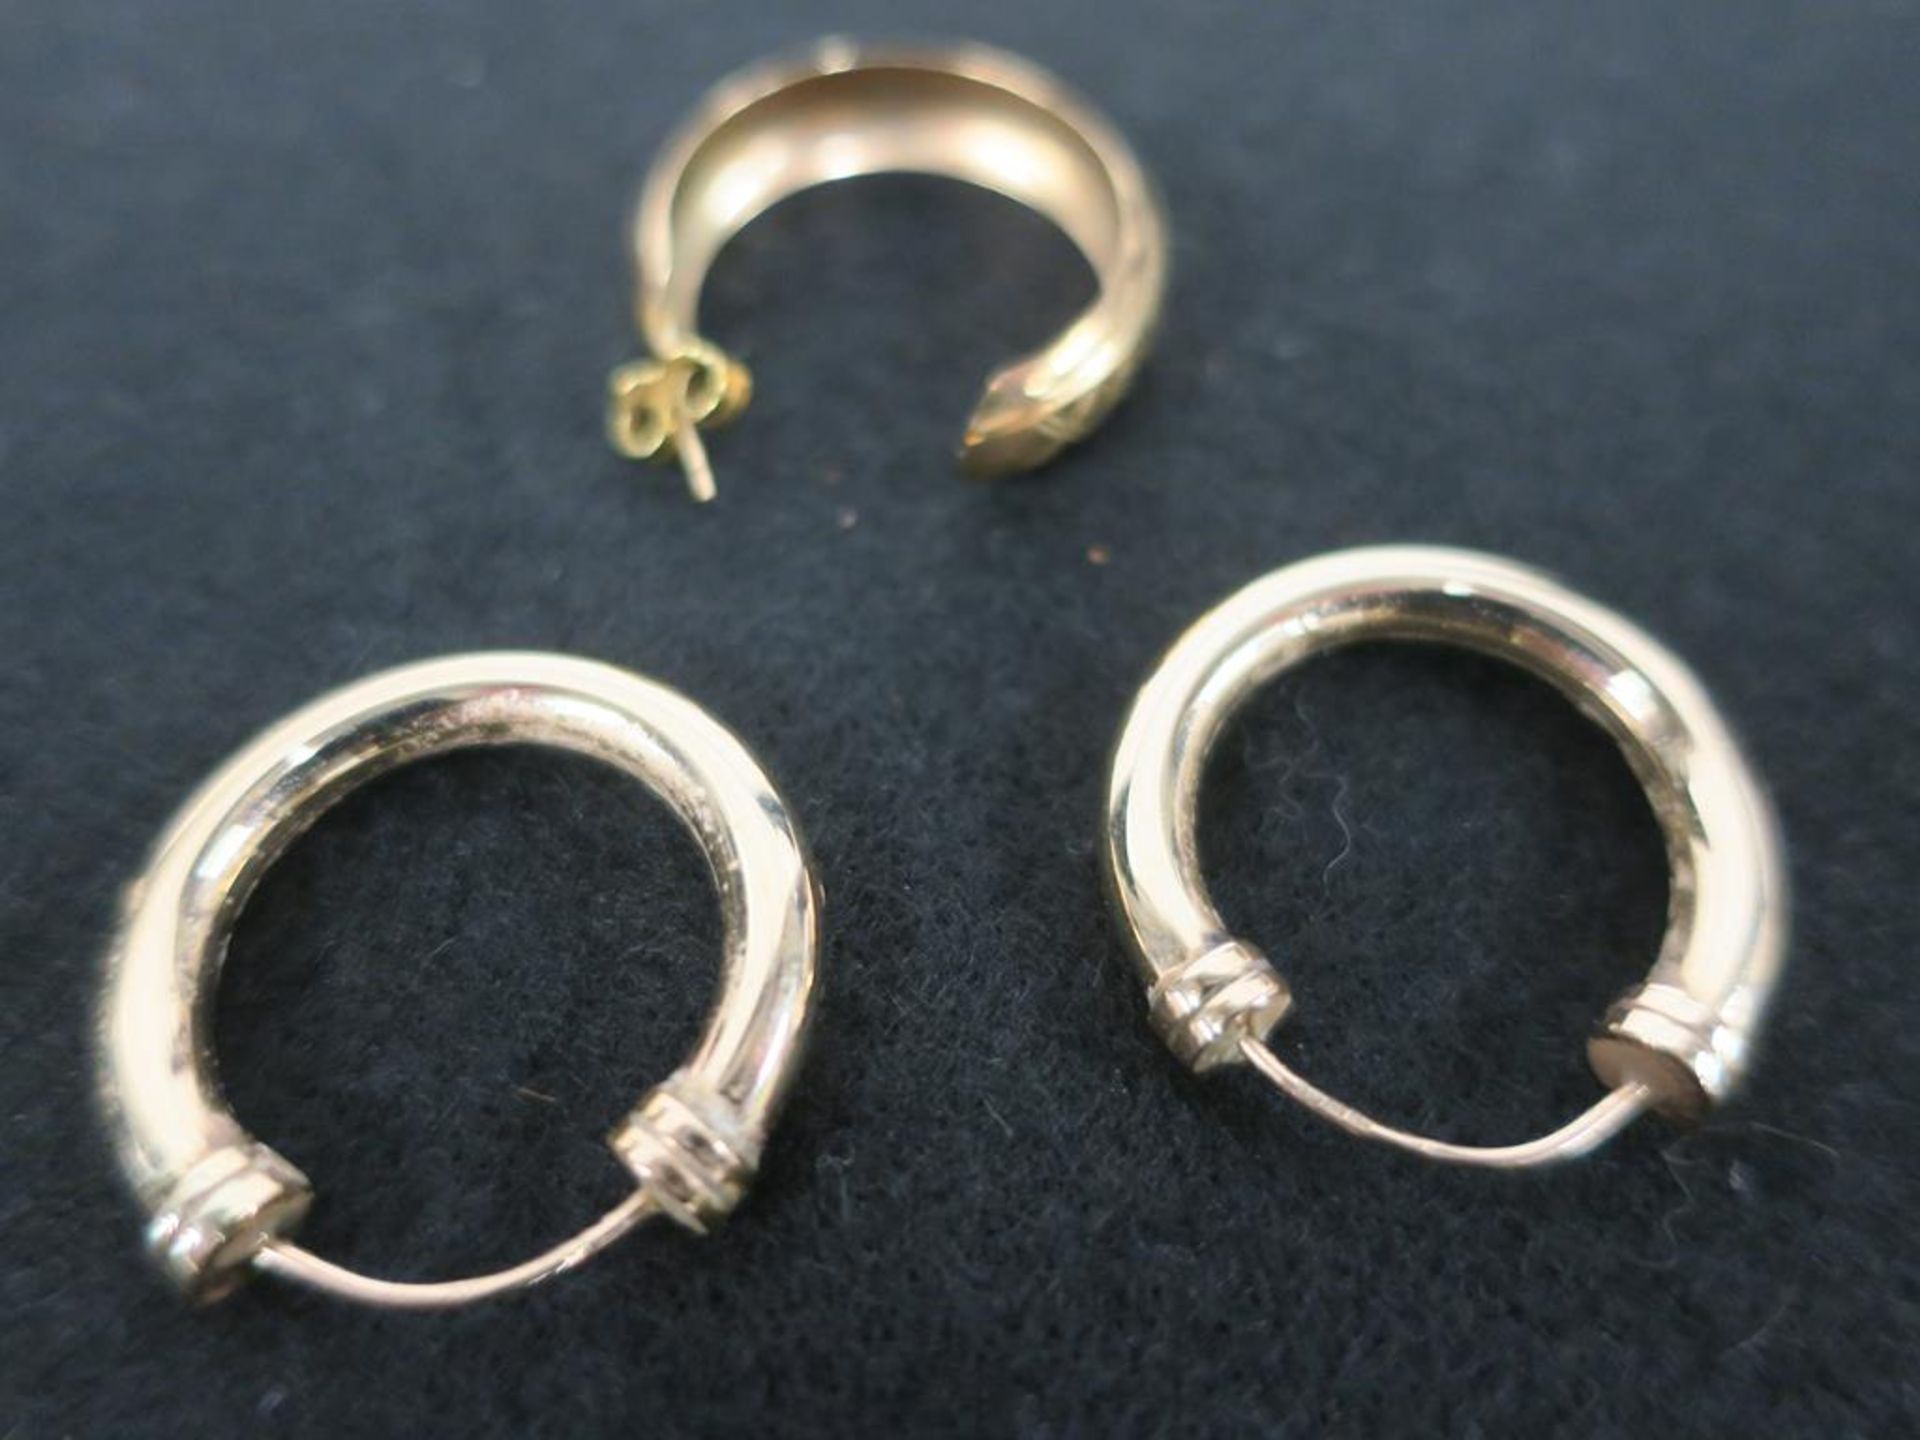 A Pair of 9ct Gold Earrings and a Single Earring With Gold Clip (est £20-£40) - Image 2 of 2